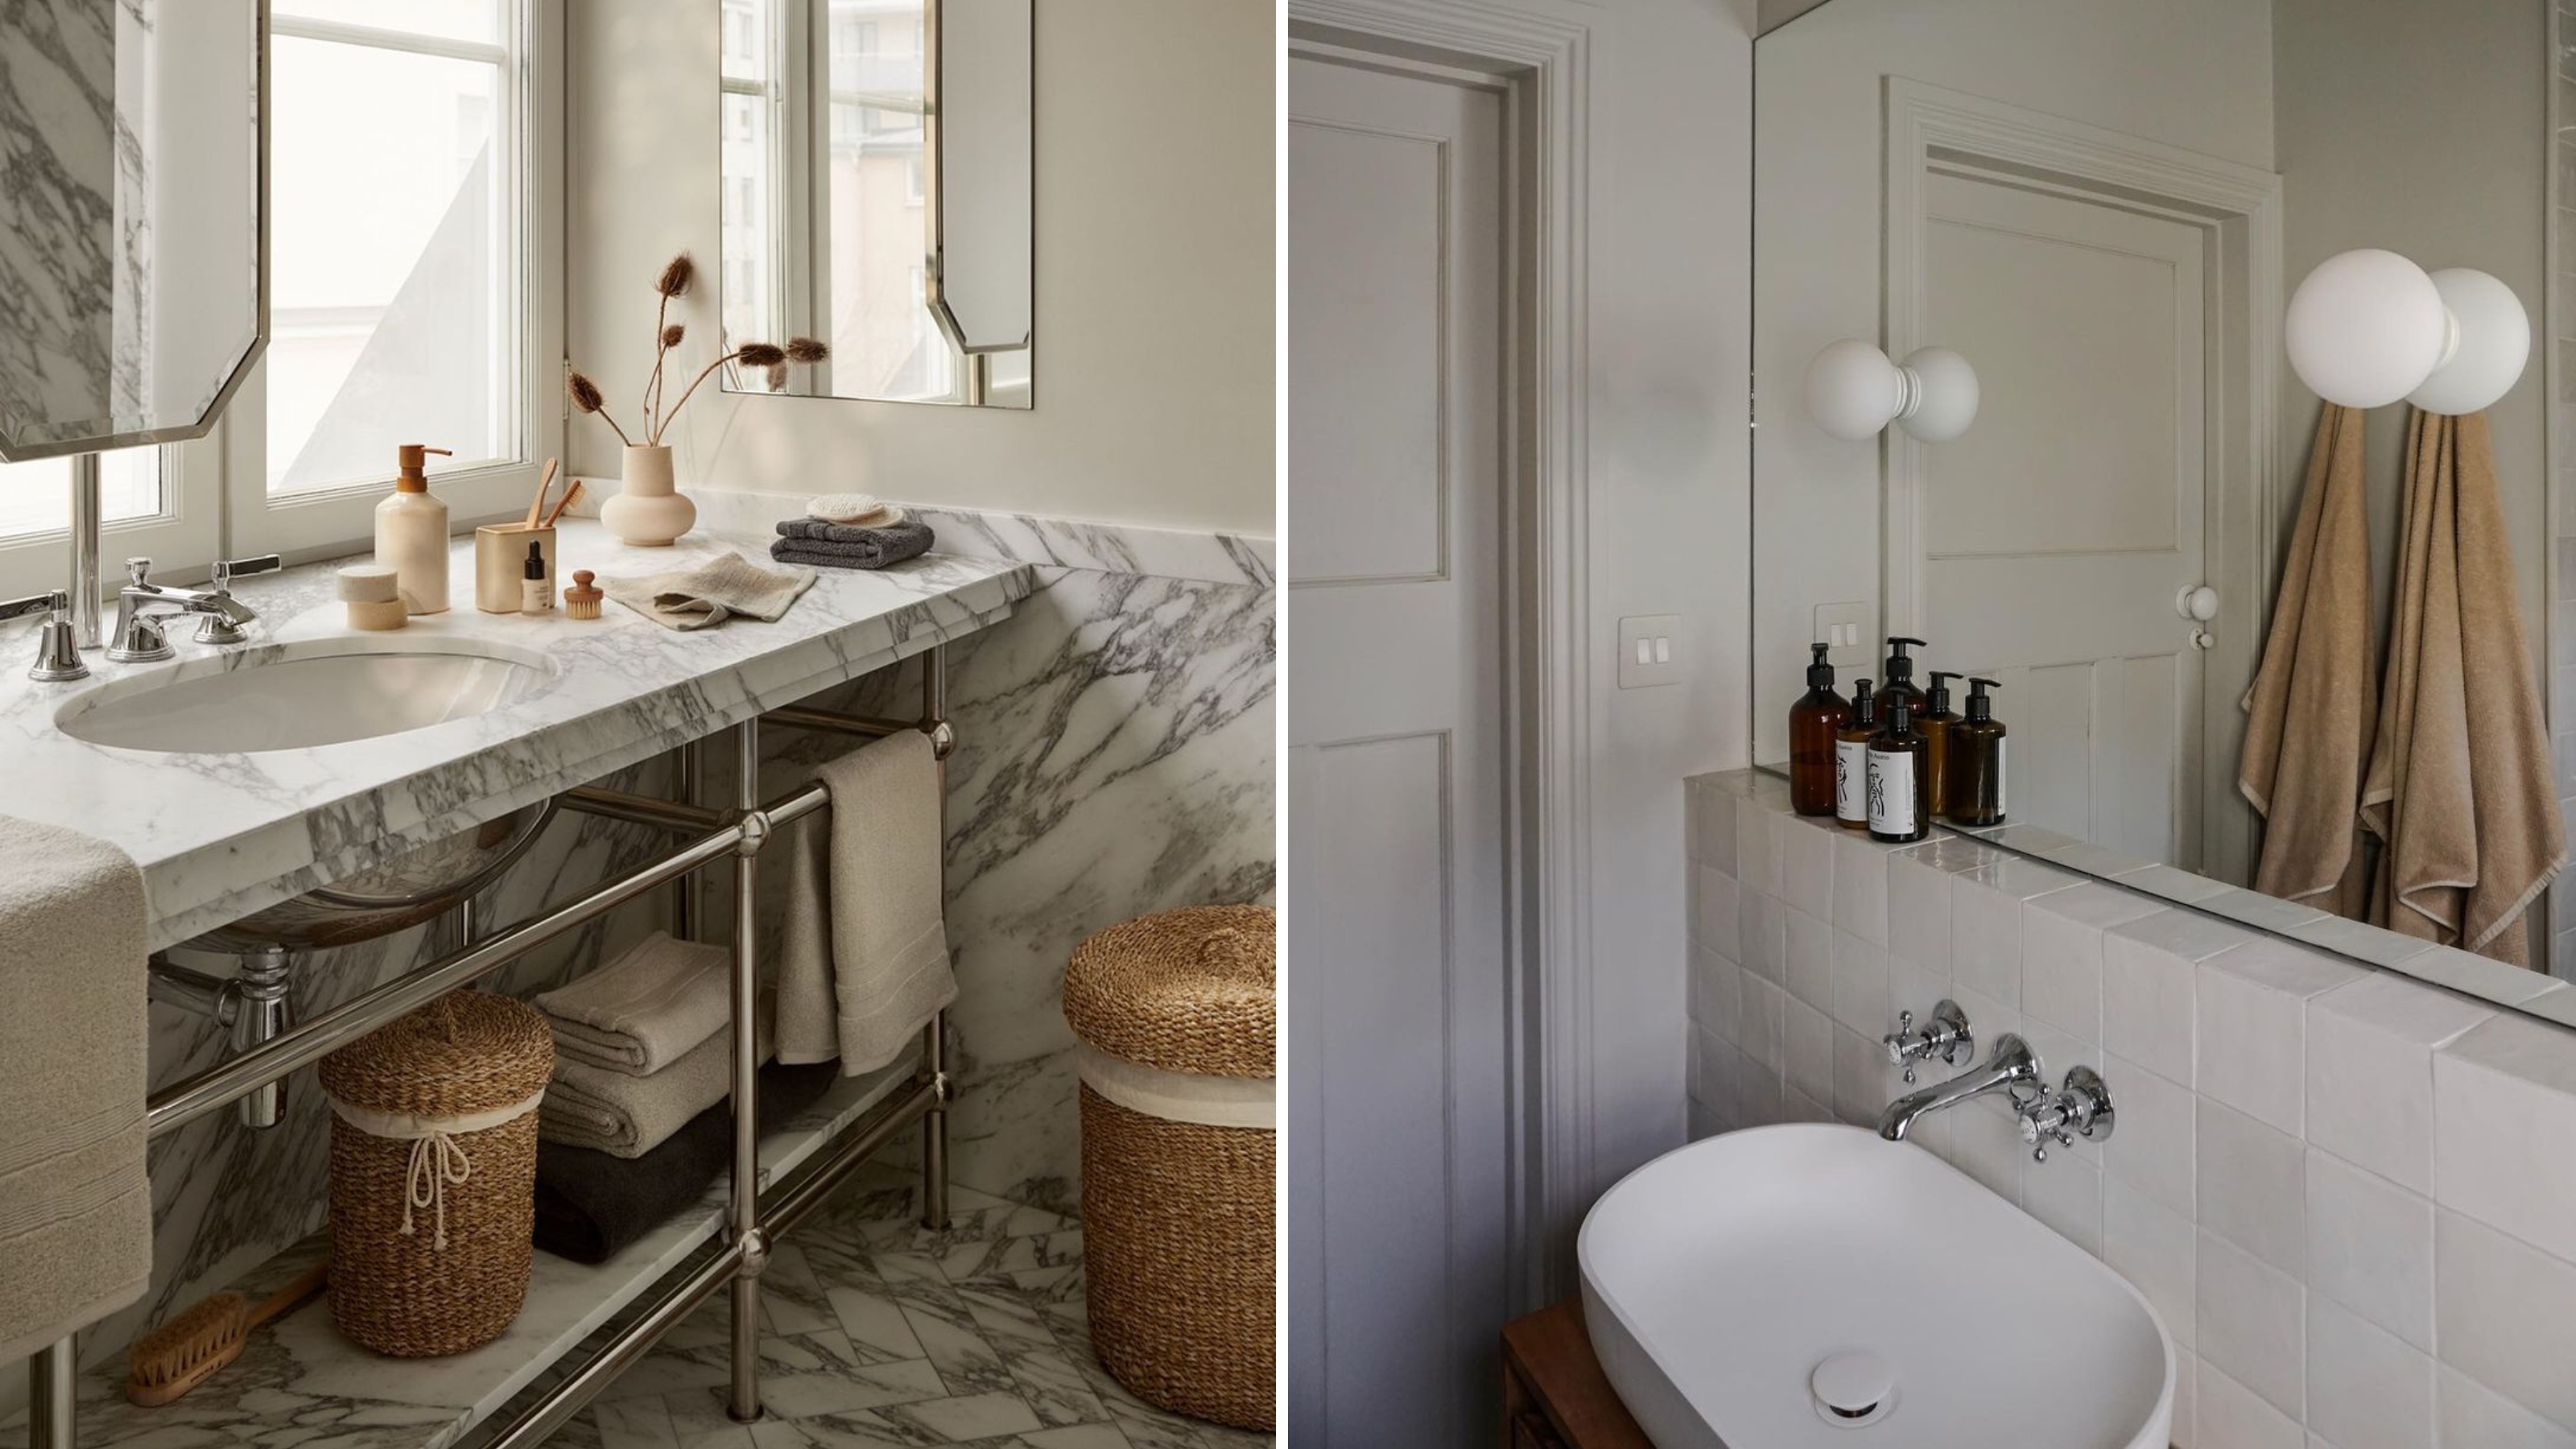 Ditch the Bath Mat: Luxe Area Rug Ideas for Your Bathroom